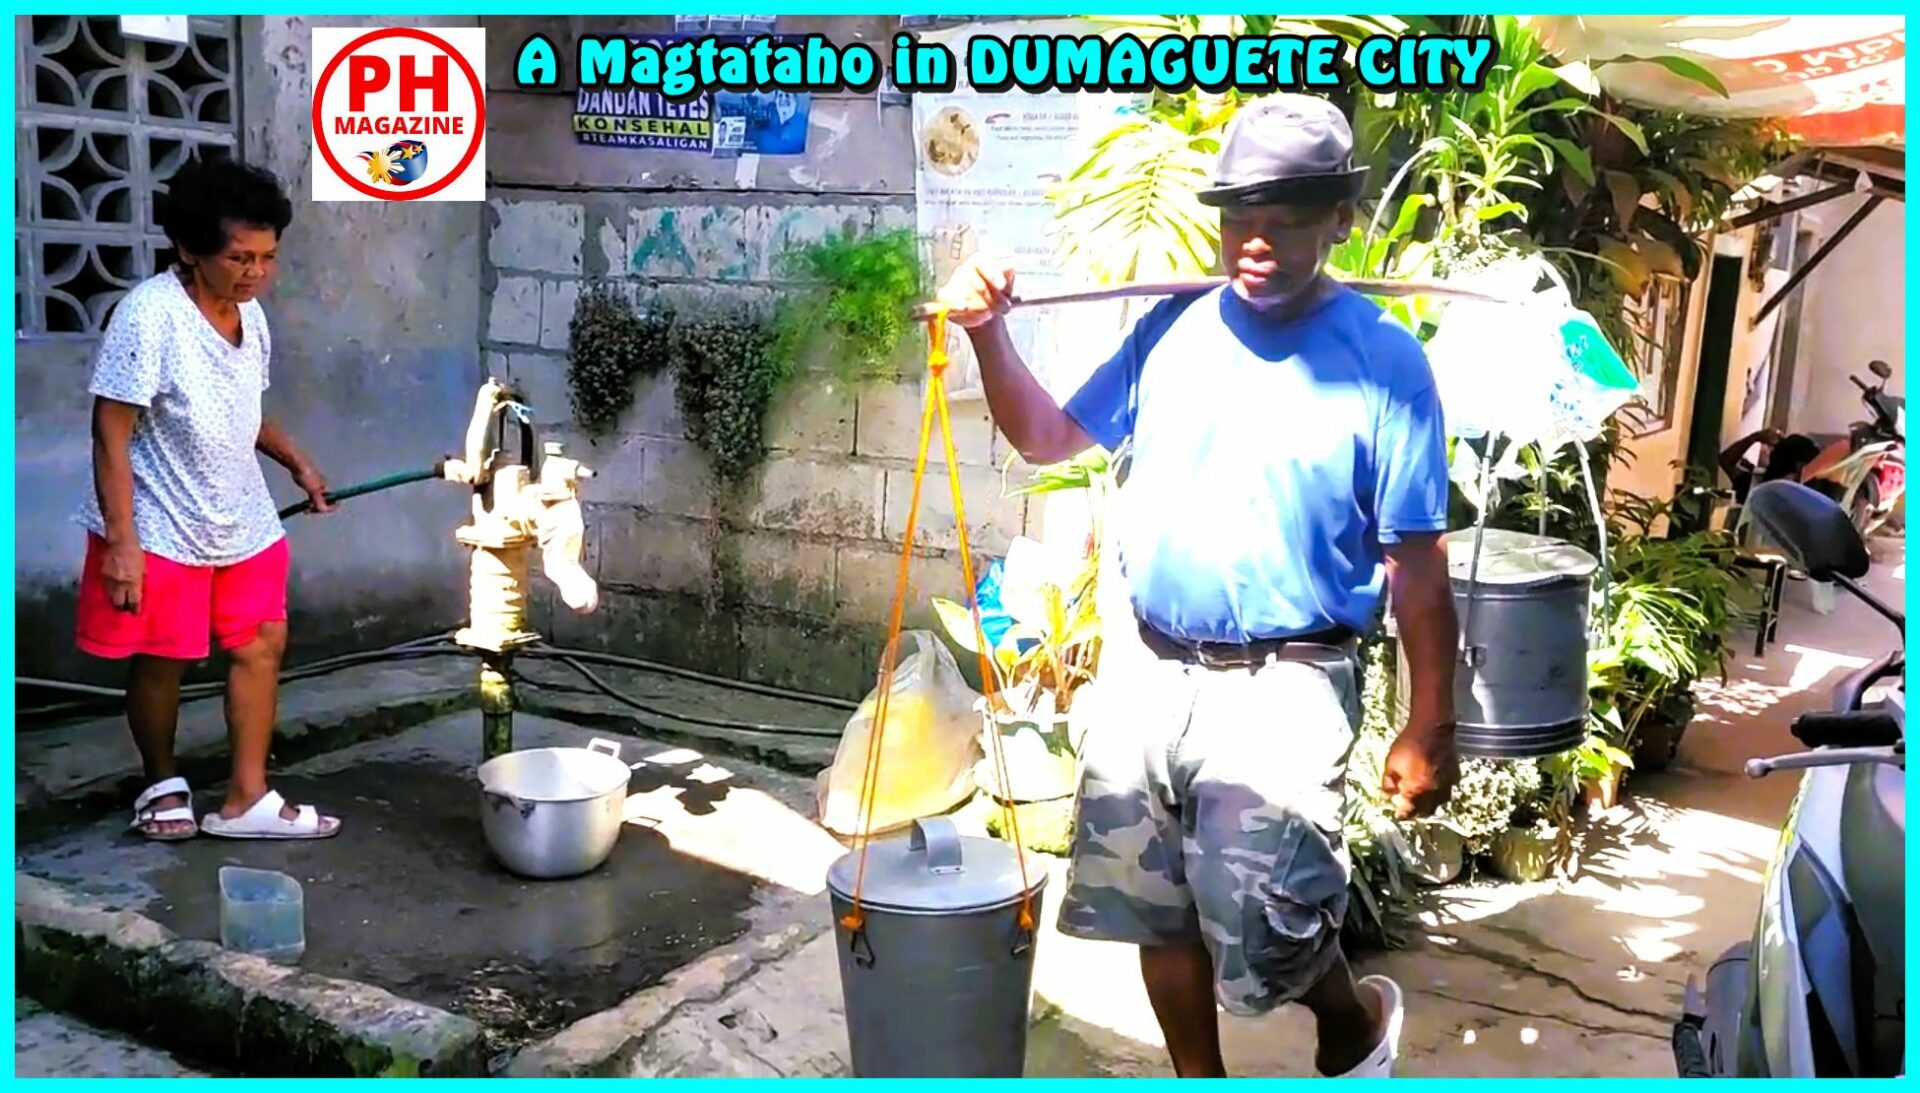 SIGHTS OF NEGROS - PHOTO OF THE DAY - A Magtataho in Dumaguete City